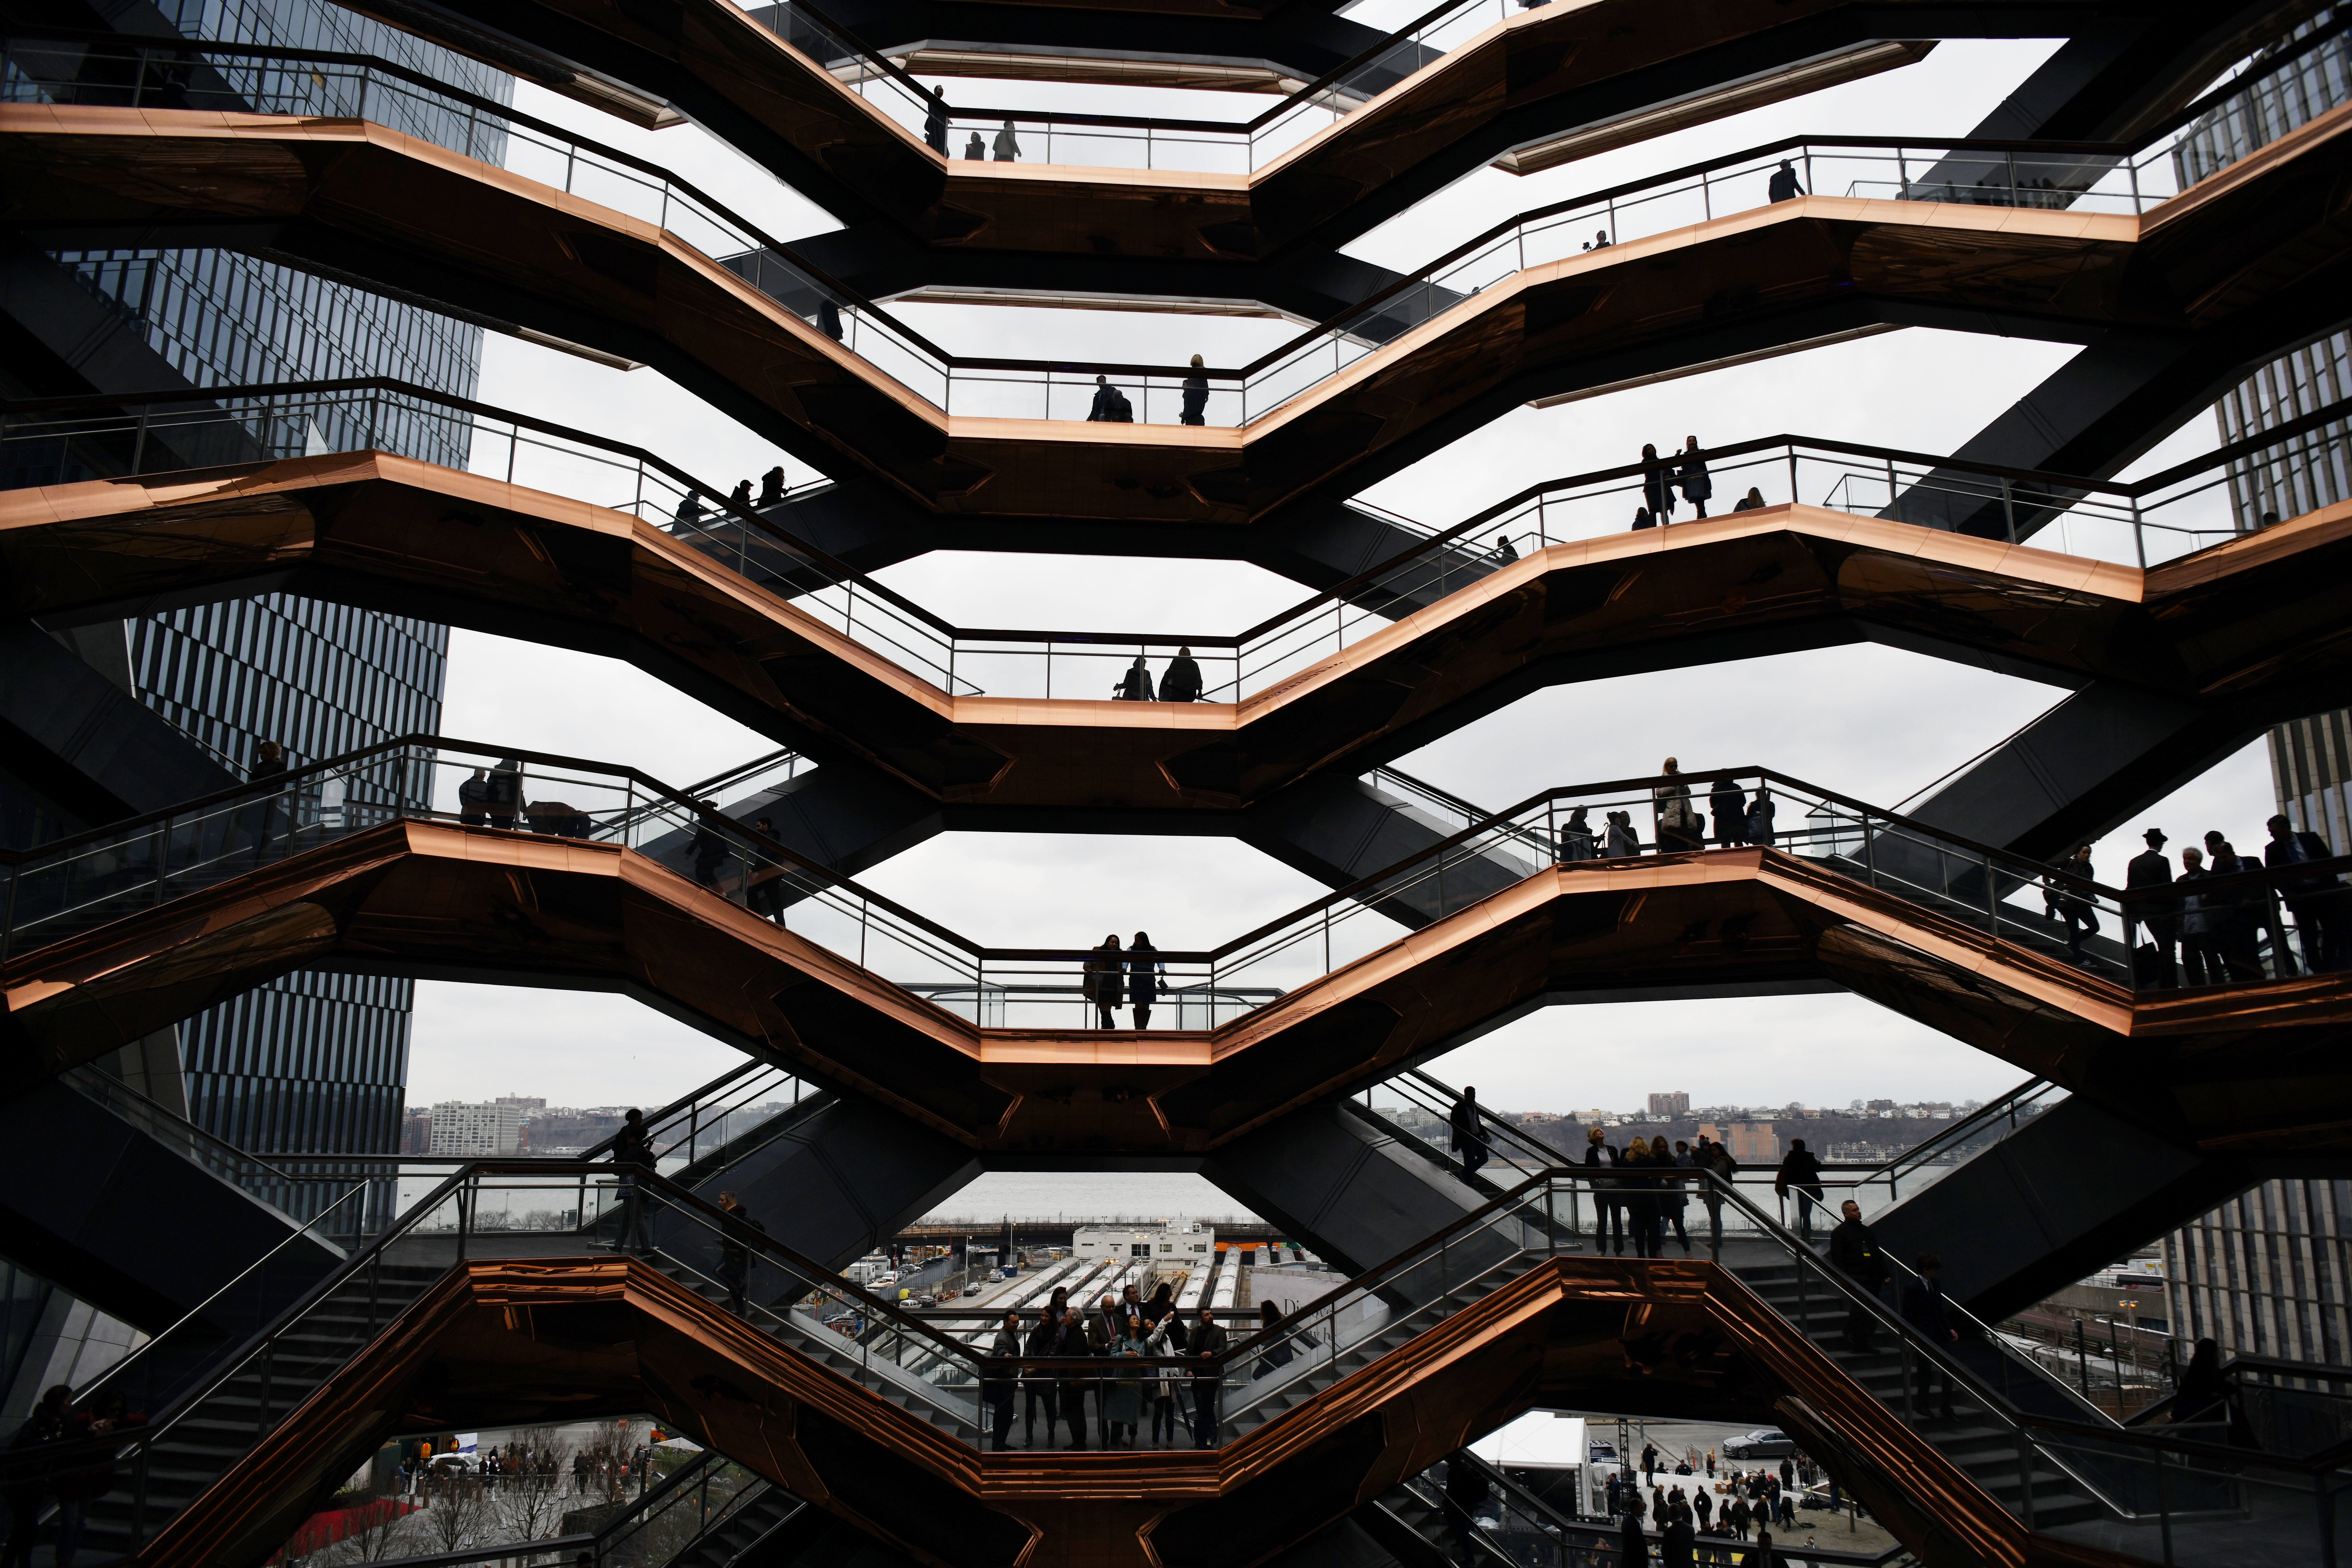 File image: A view inside the Vessel at Hudson Yards, New York's newest neighborhood, official opening event on 15 March, 2019 in New York City